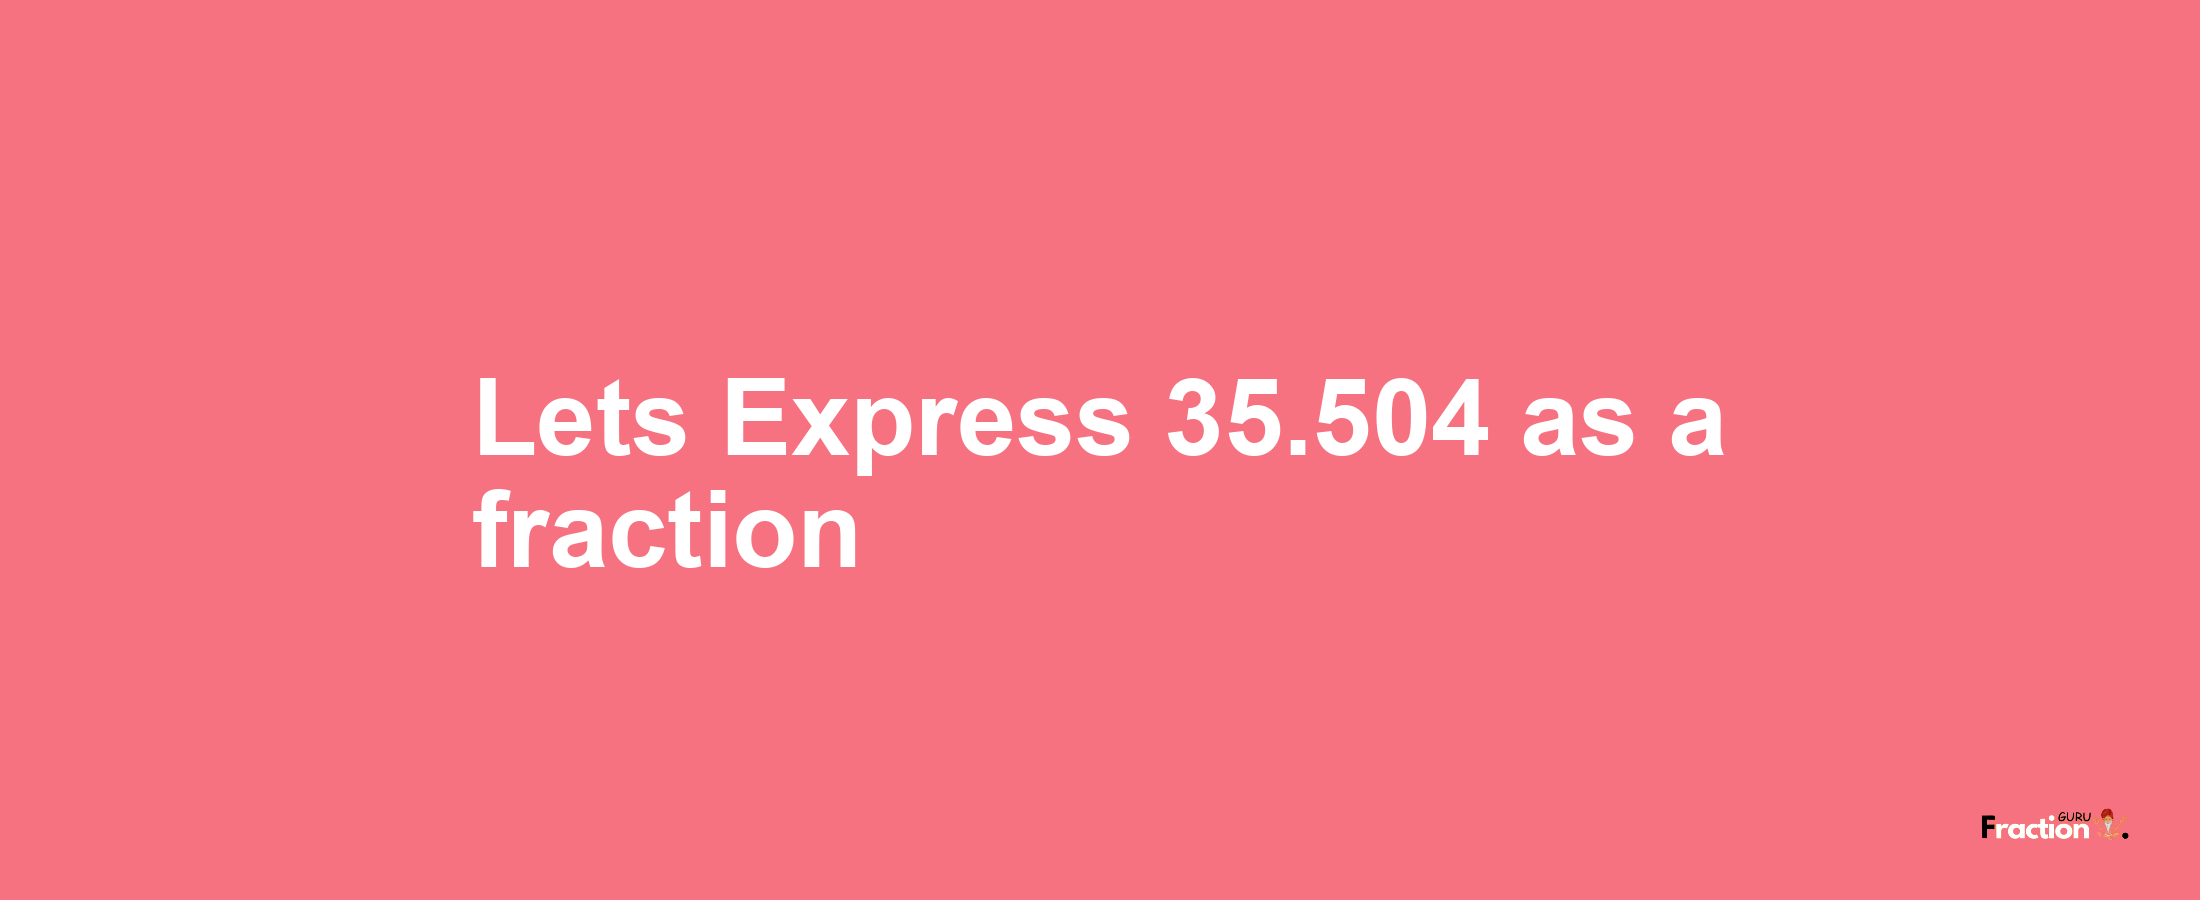 Lets Express 35.504 as afraction